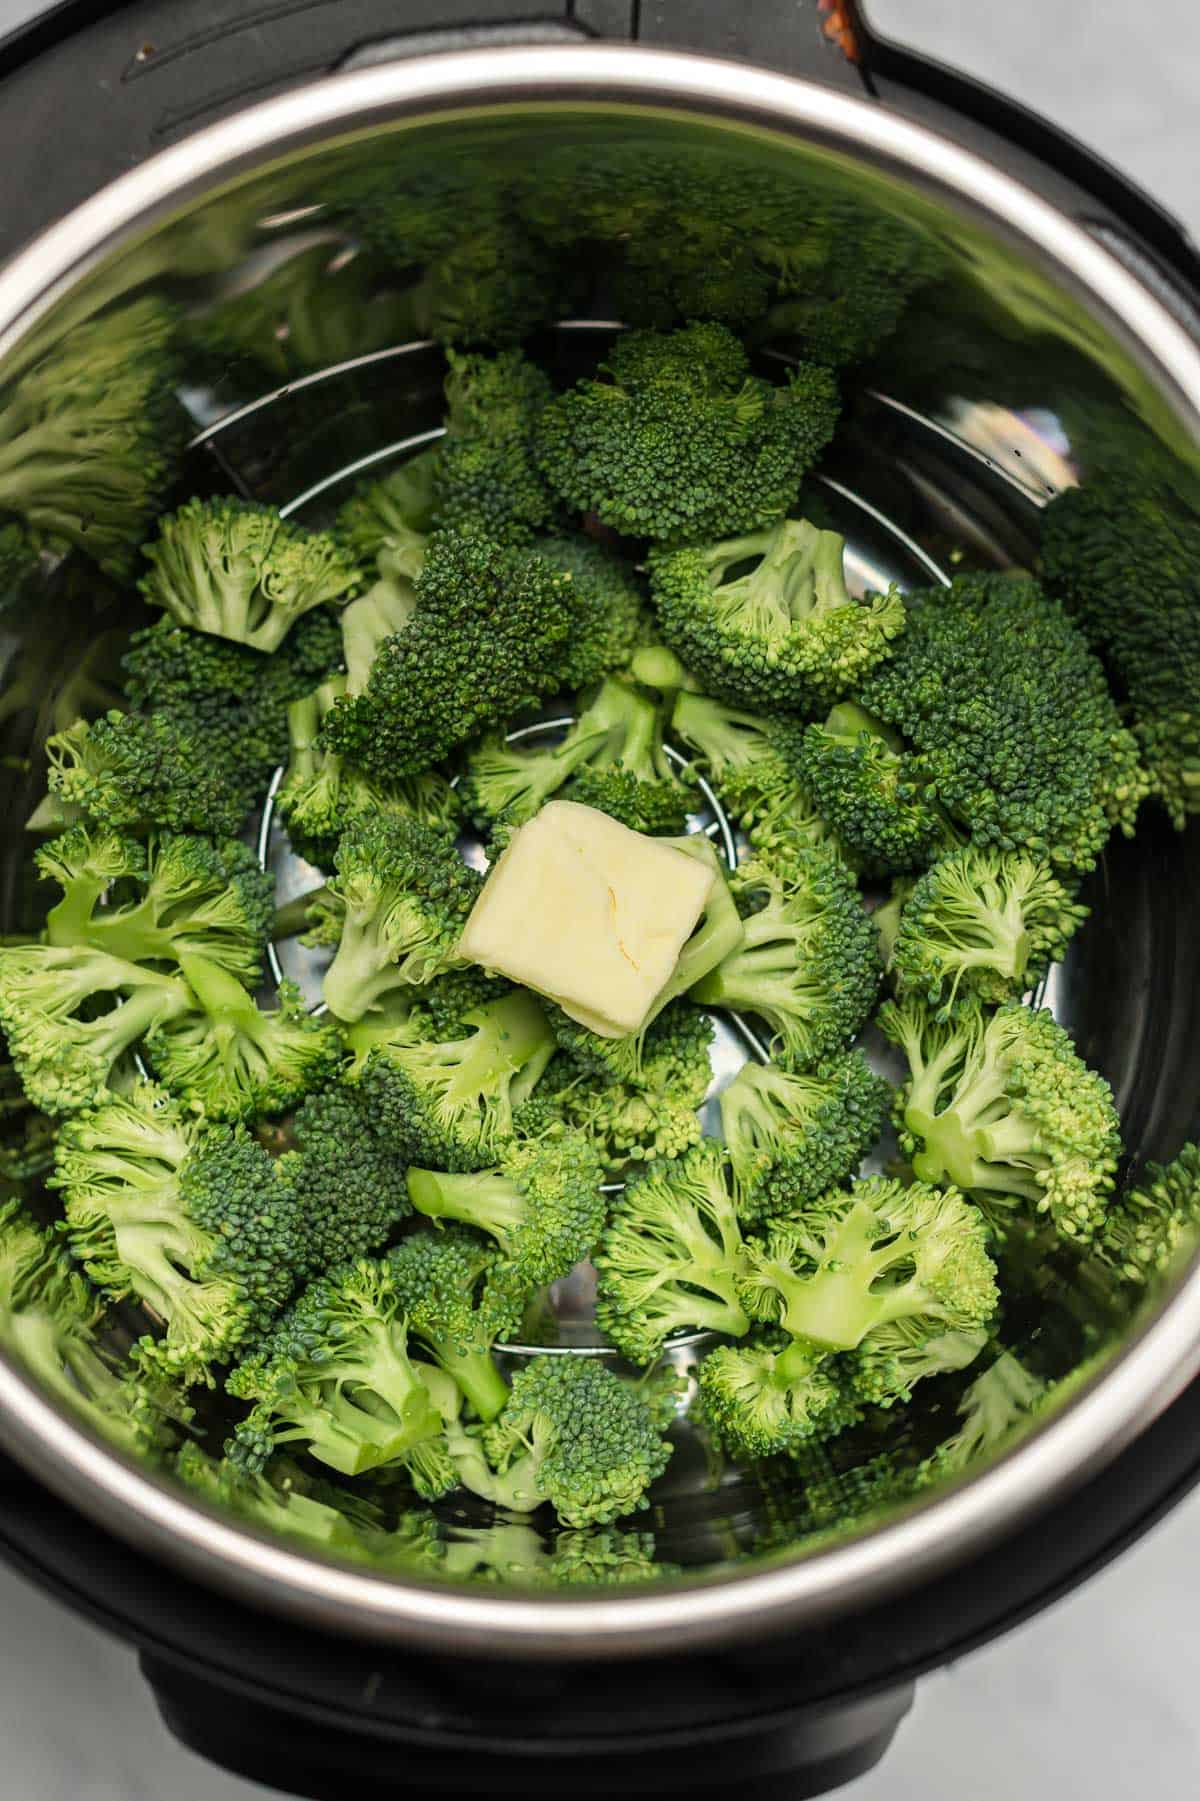 1 tablespoon of butter added to the broccoli